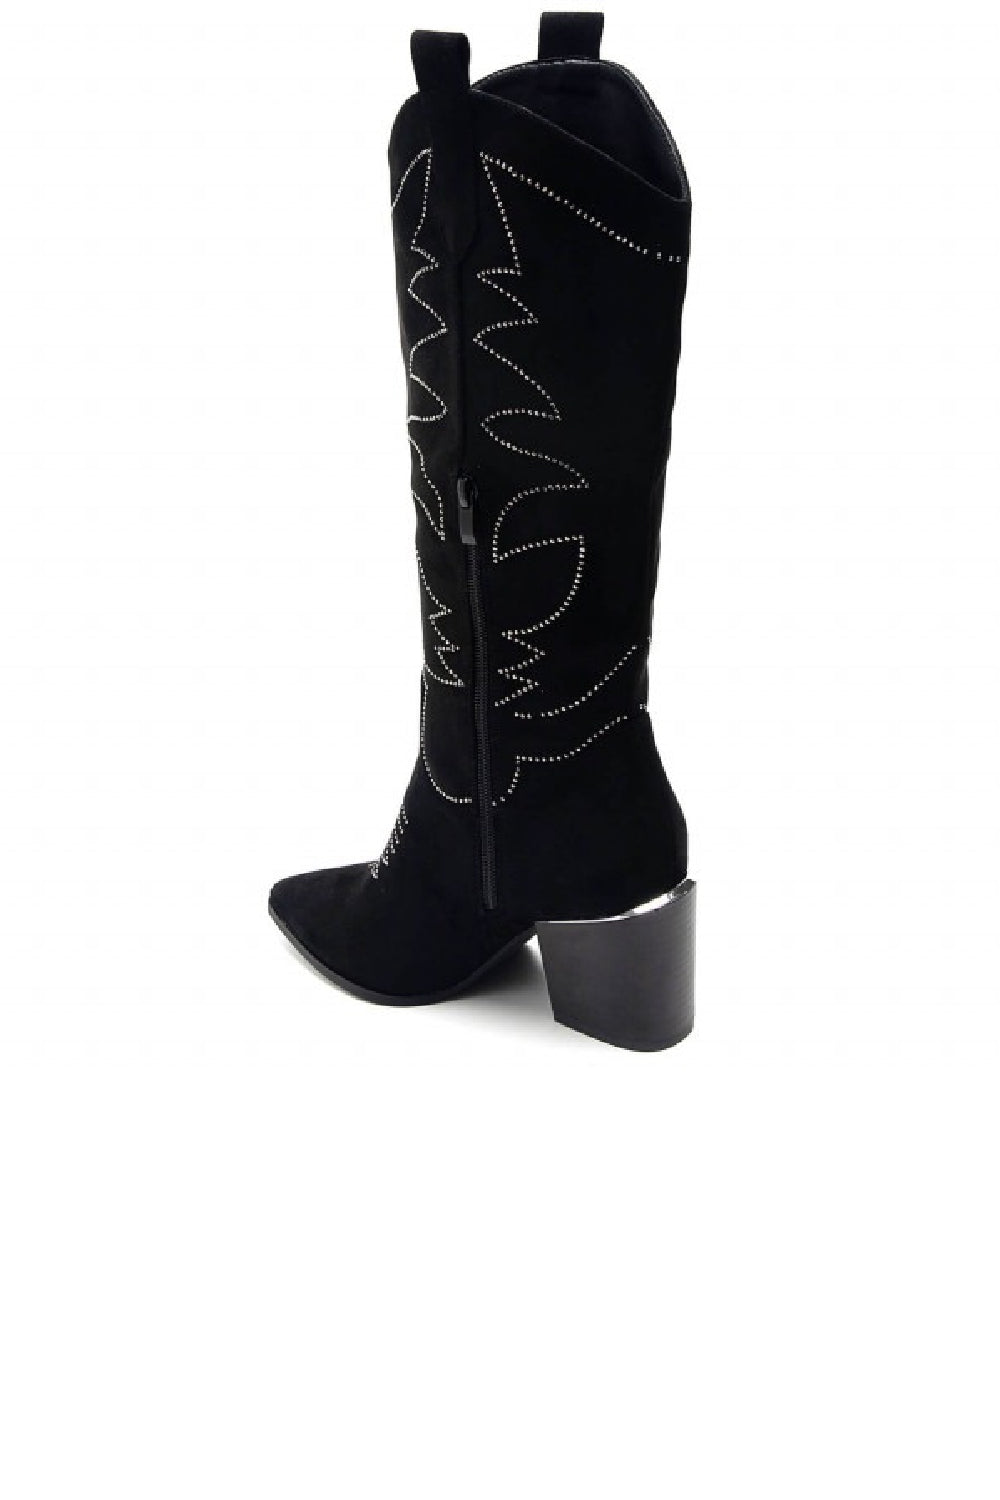 BLACK EMBROIDED WESTERN KNEE CALF HIGH COWBOY BOOTS